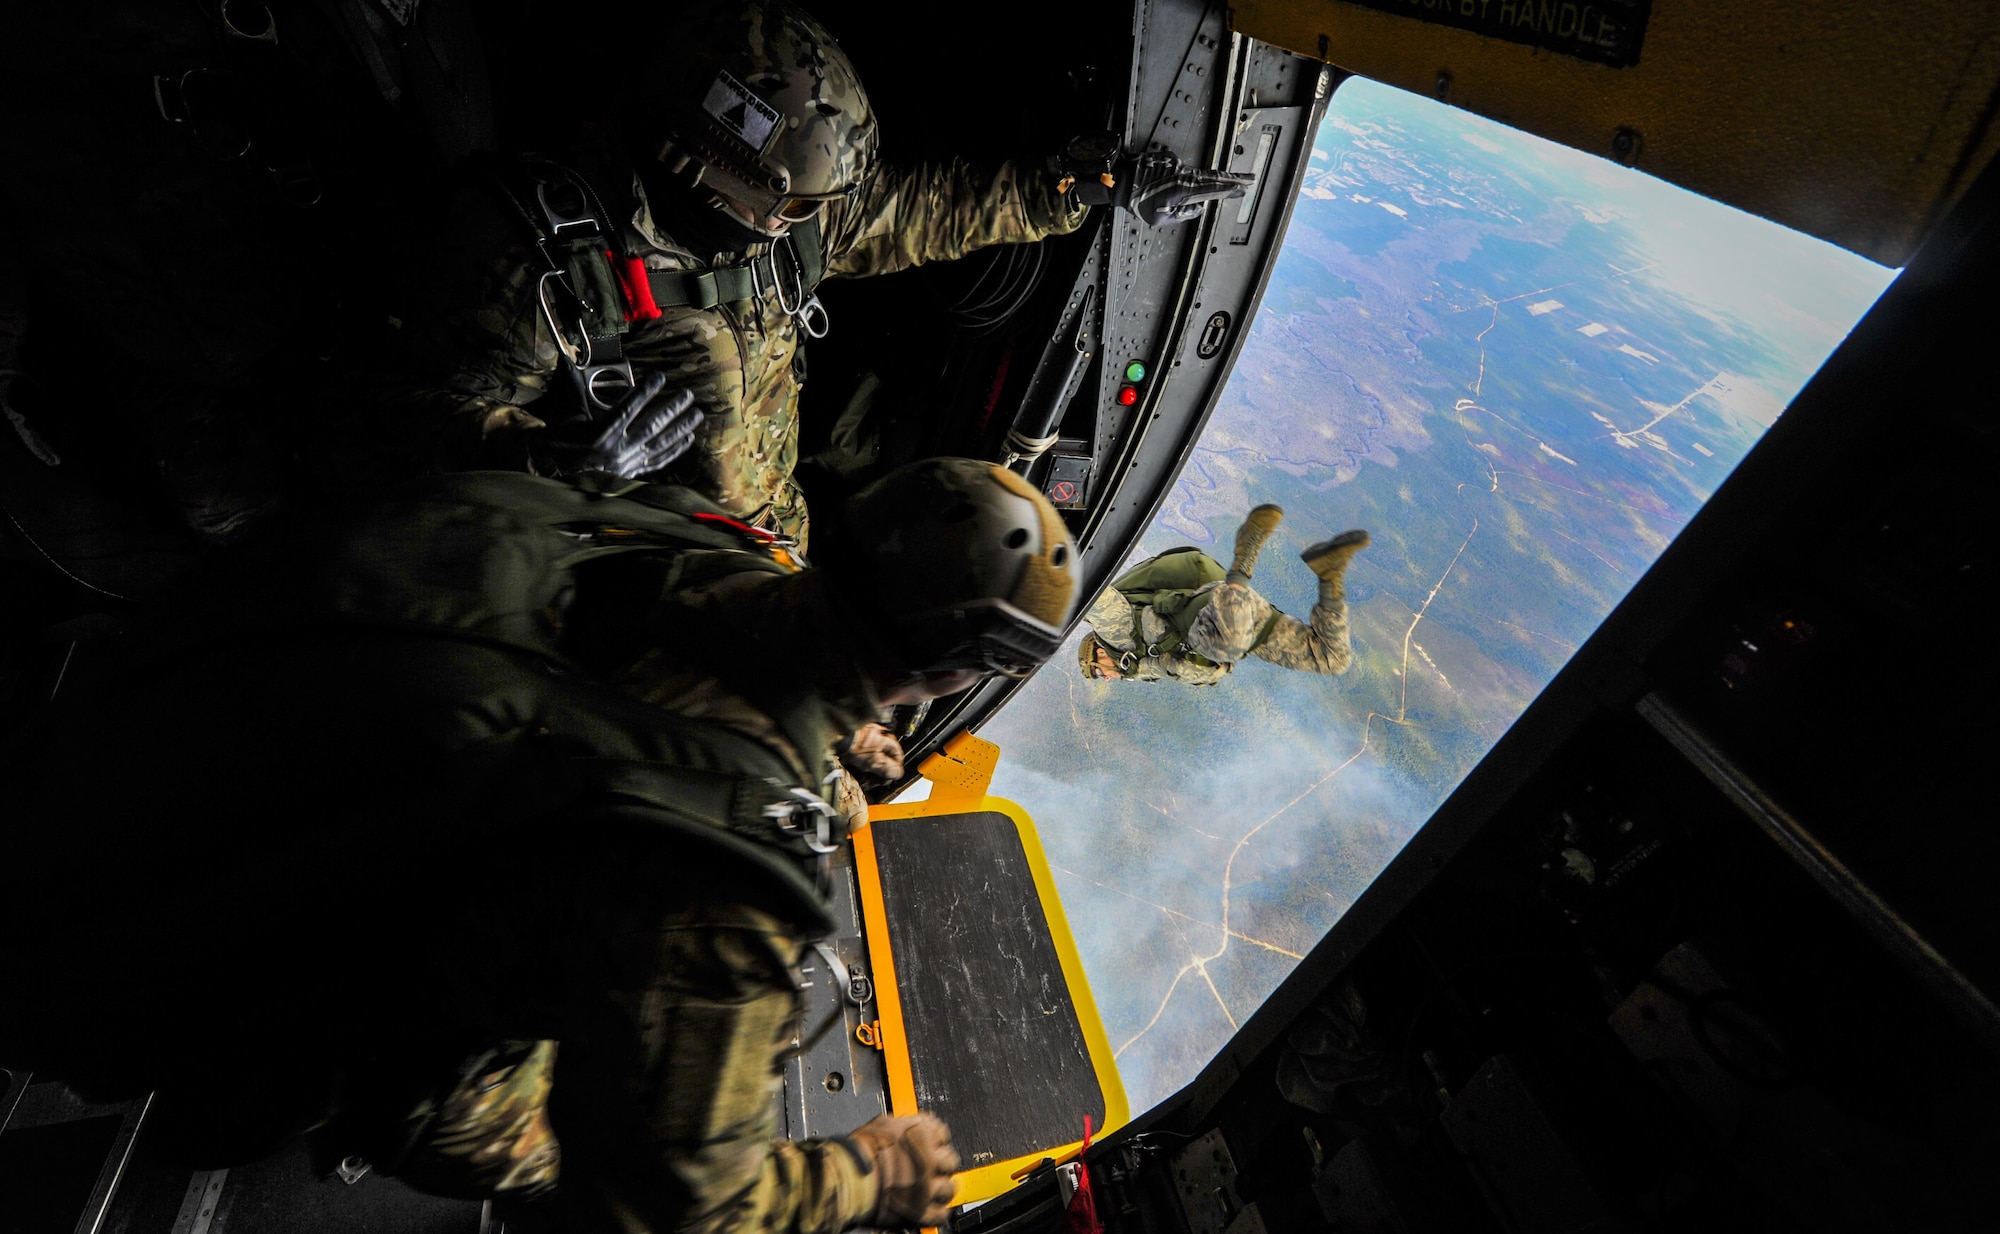 Special Tactics Airmen from the 24th Special Operations Wing jump out of an MC-130H Talon II at Hurlburt Field, Fla., Jan. 7, 2015. The Airmen were from various special tactics career fields, including special operations weathermen, combat controllers, pararescuemen and tactical air control parties. The 24th SOW’s mission is to provide Special Tactics forces for rapid global employment to enable airpower success. (U.S. Air Force photo/Senior Airman Christopher Callaway)